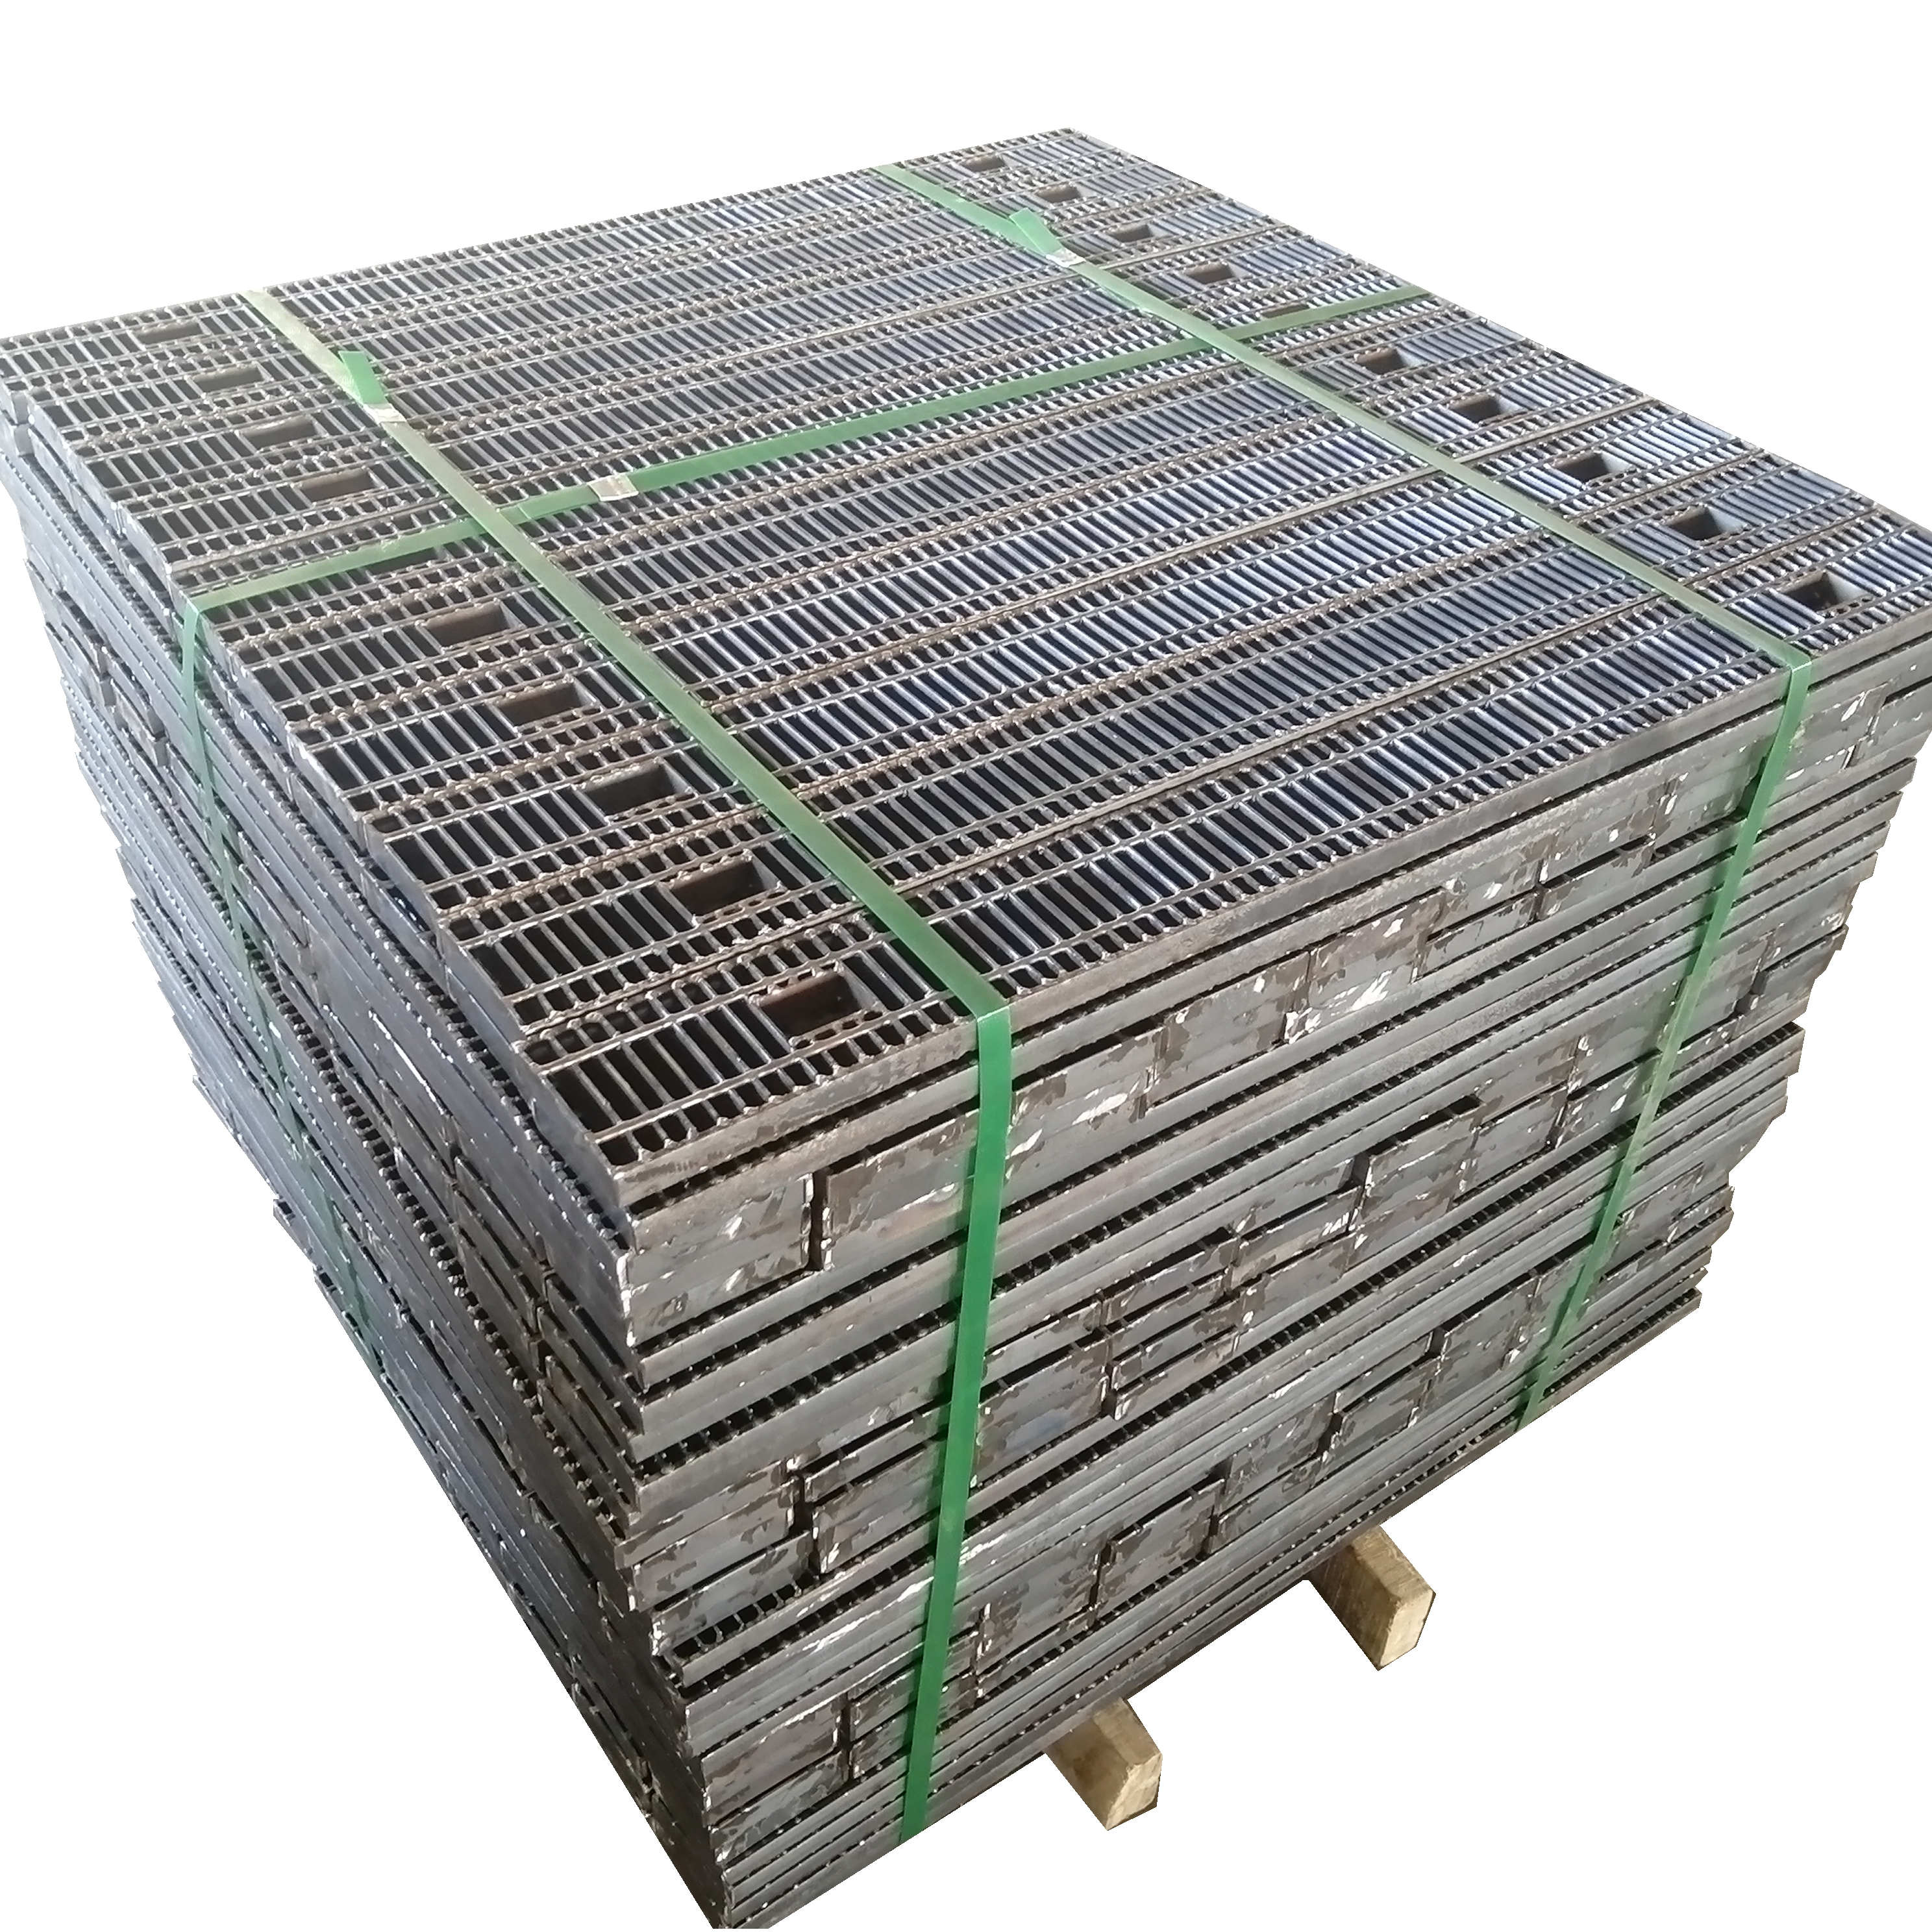 Common Catwalk Galvanized Export To Japan  Metal Grid Steel Grating Prices Featured Image